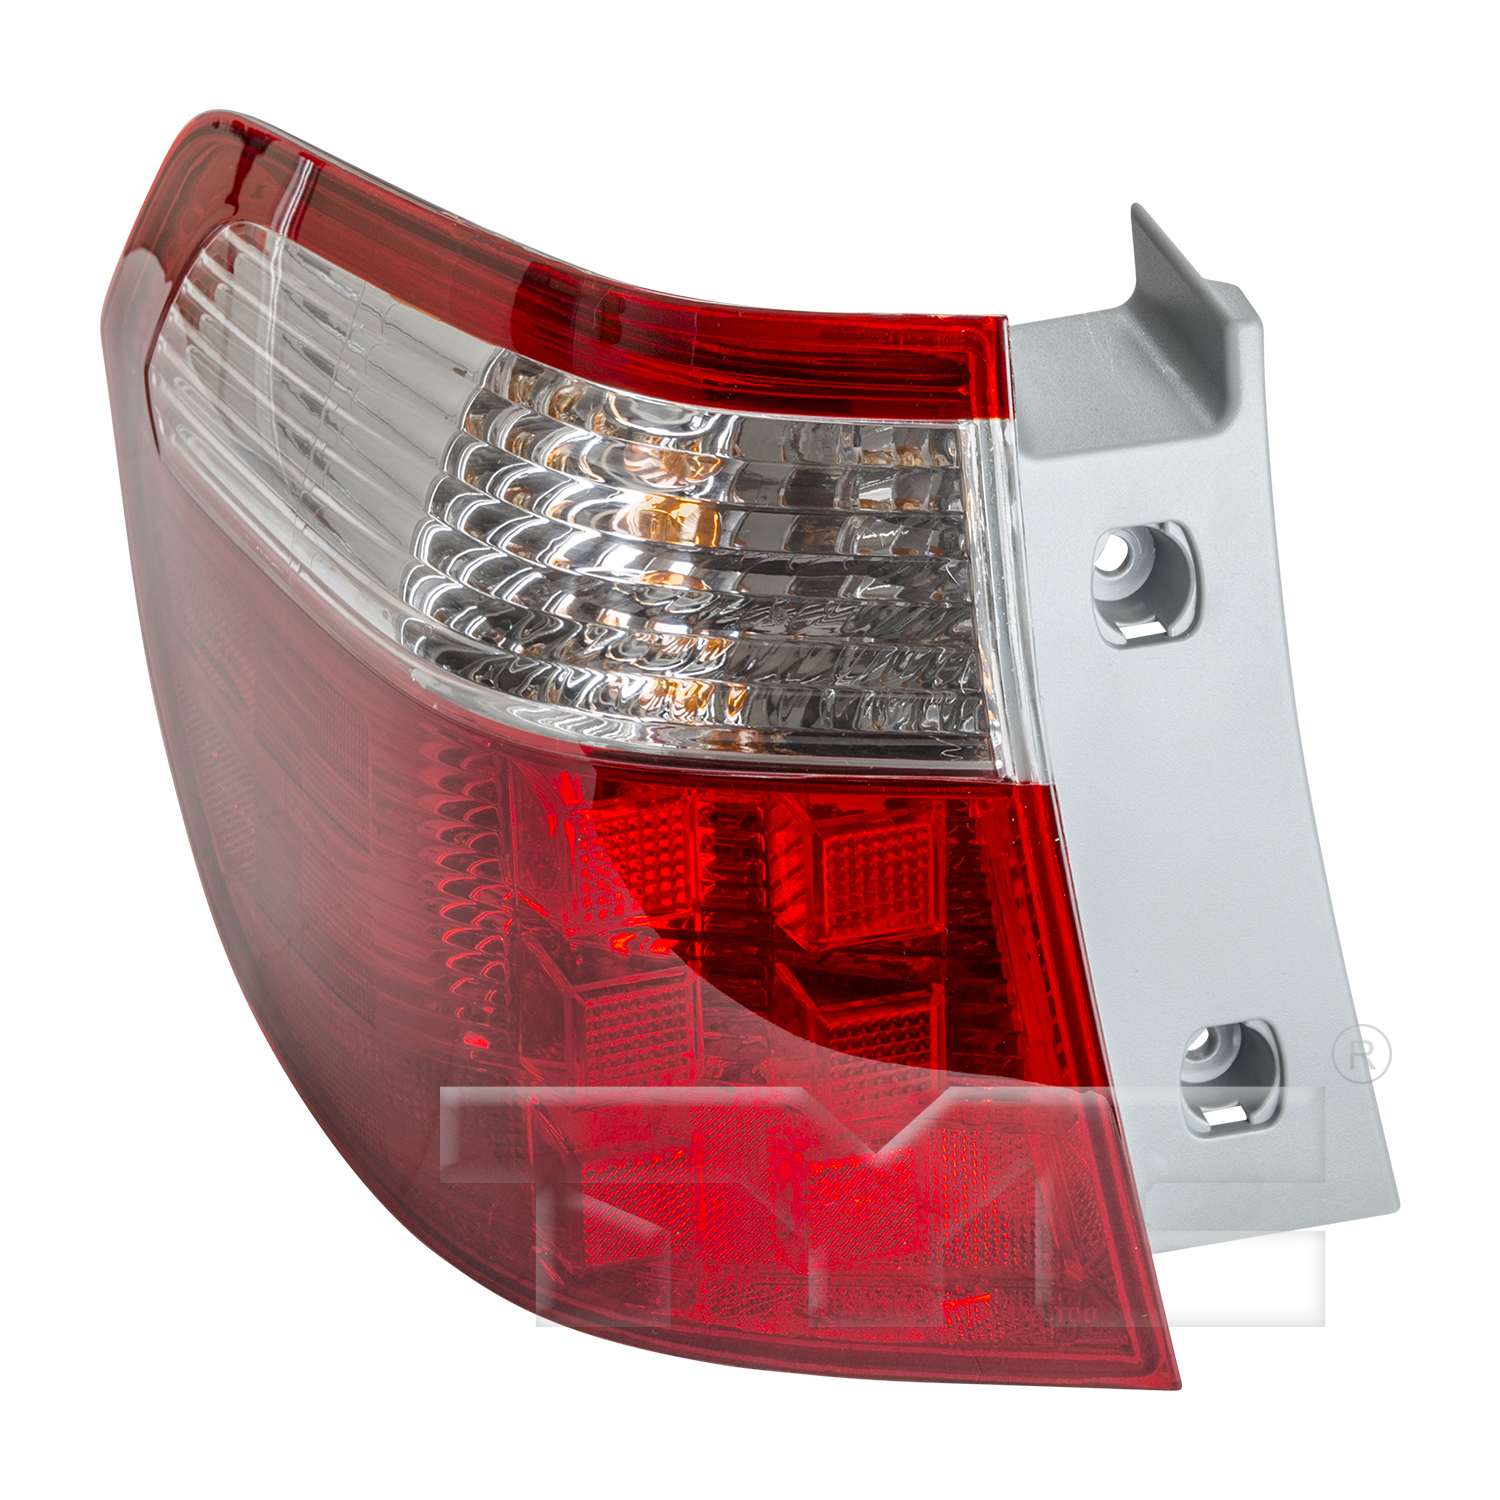 Aftermarket TAILLIGHTS for HONDA - ODYSSEY, ODYSSEY,05-07,LT Taillamp lens/housing